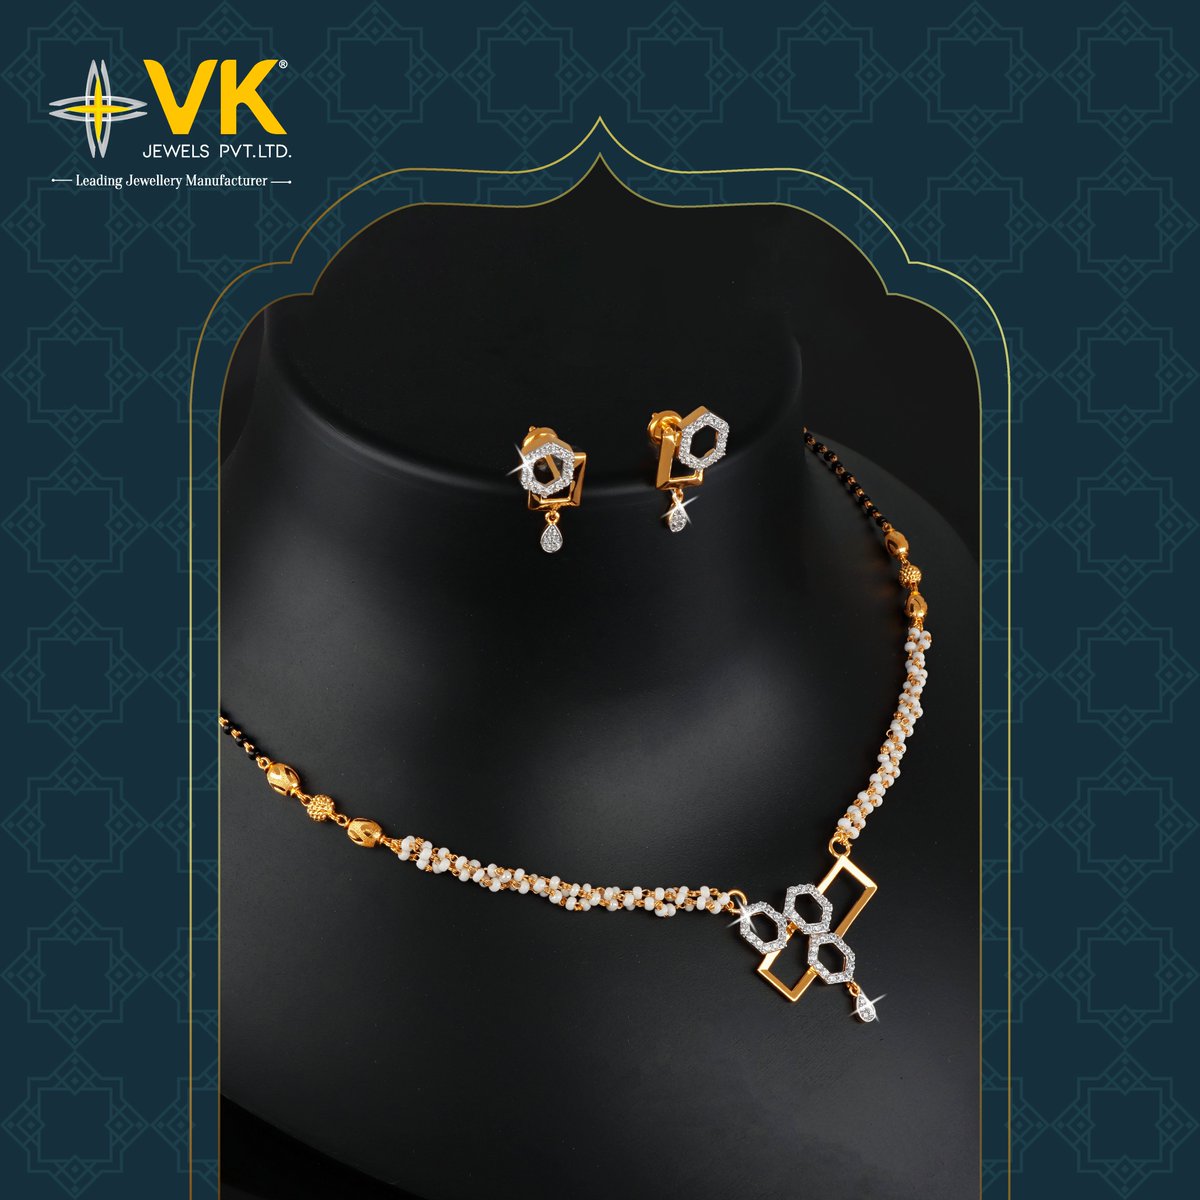 Mesmerizing mastery, The Mangalsutra gleams with artistry brilliance, capturing hearts and illuminating enduring love and timeless elegance!

#Mangalsutra #mangalsutradesign #mangalsutracollection #neckalce #earrings #bracelet #accessories #ring #style #VK #vkjewels #India